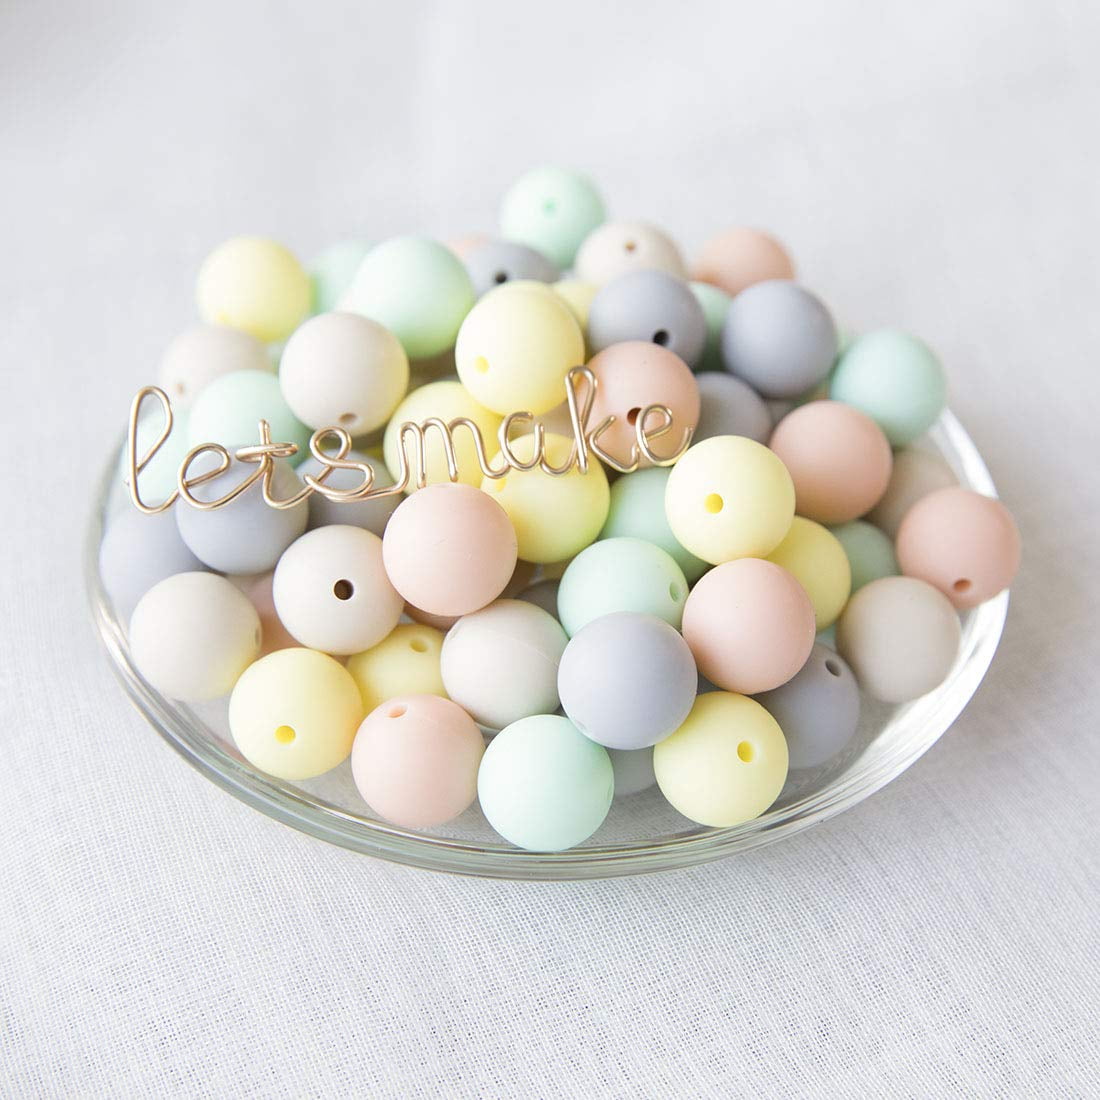 100PC 12mm Silicone Beads DIY Necklace Bracelet Silicone Beads for